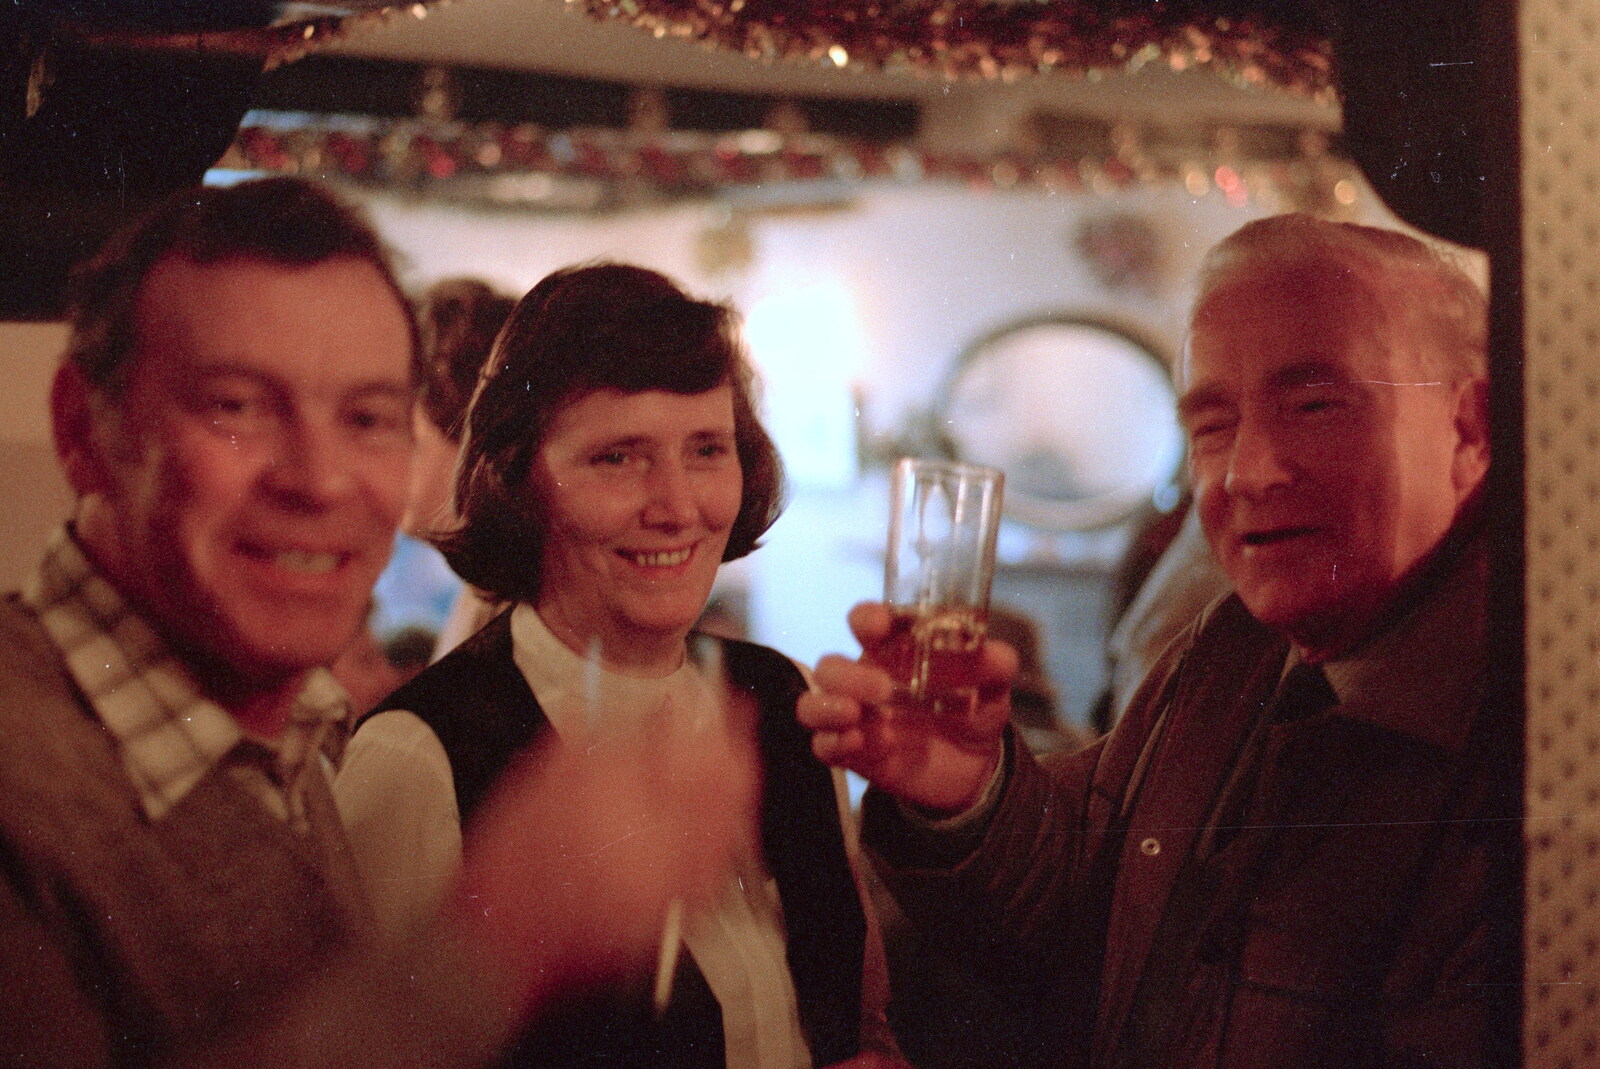 Dad's friend Jack (right) in the Bollington Cock from Christmas in Macclesfield and Wetherby, Cheshire  and Yorkshire - 25th December 1985